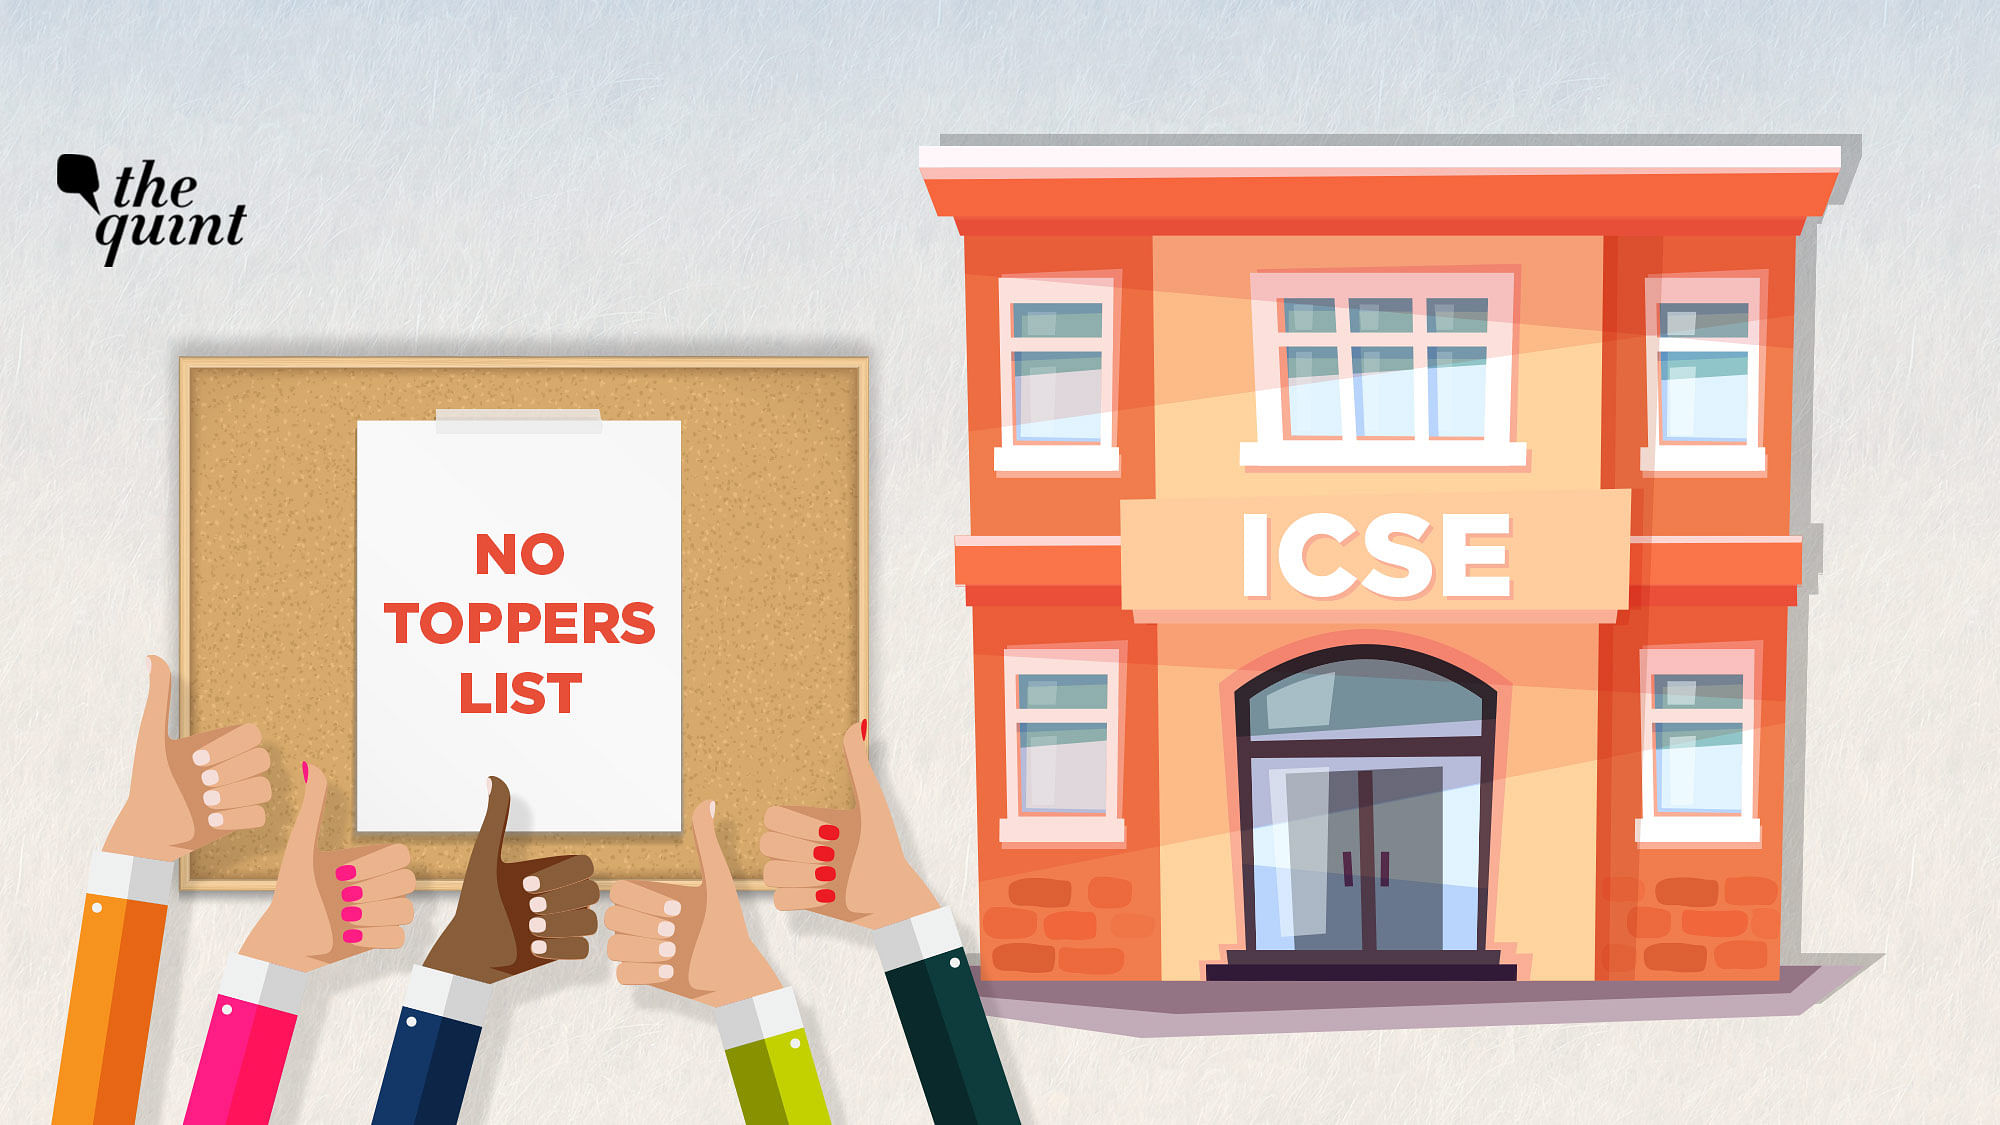 The CISCE has said that it will not release a topper’s list this year.